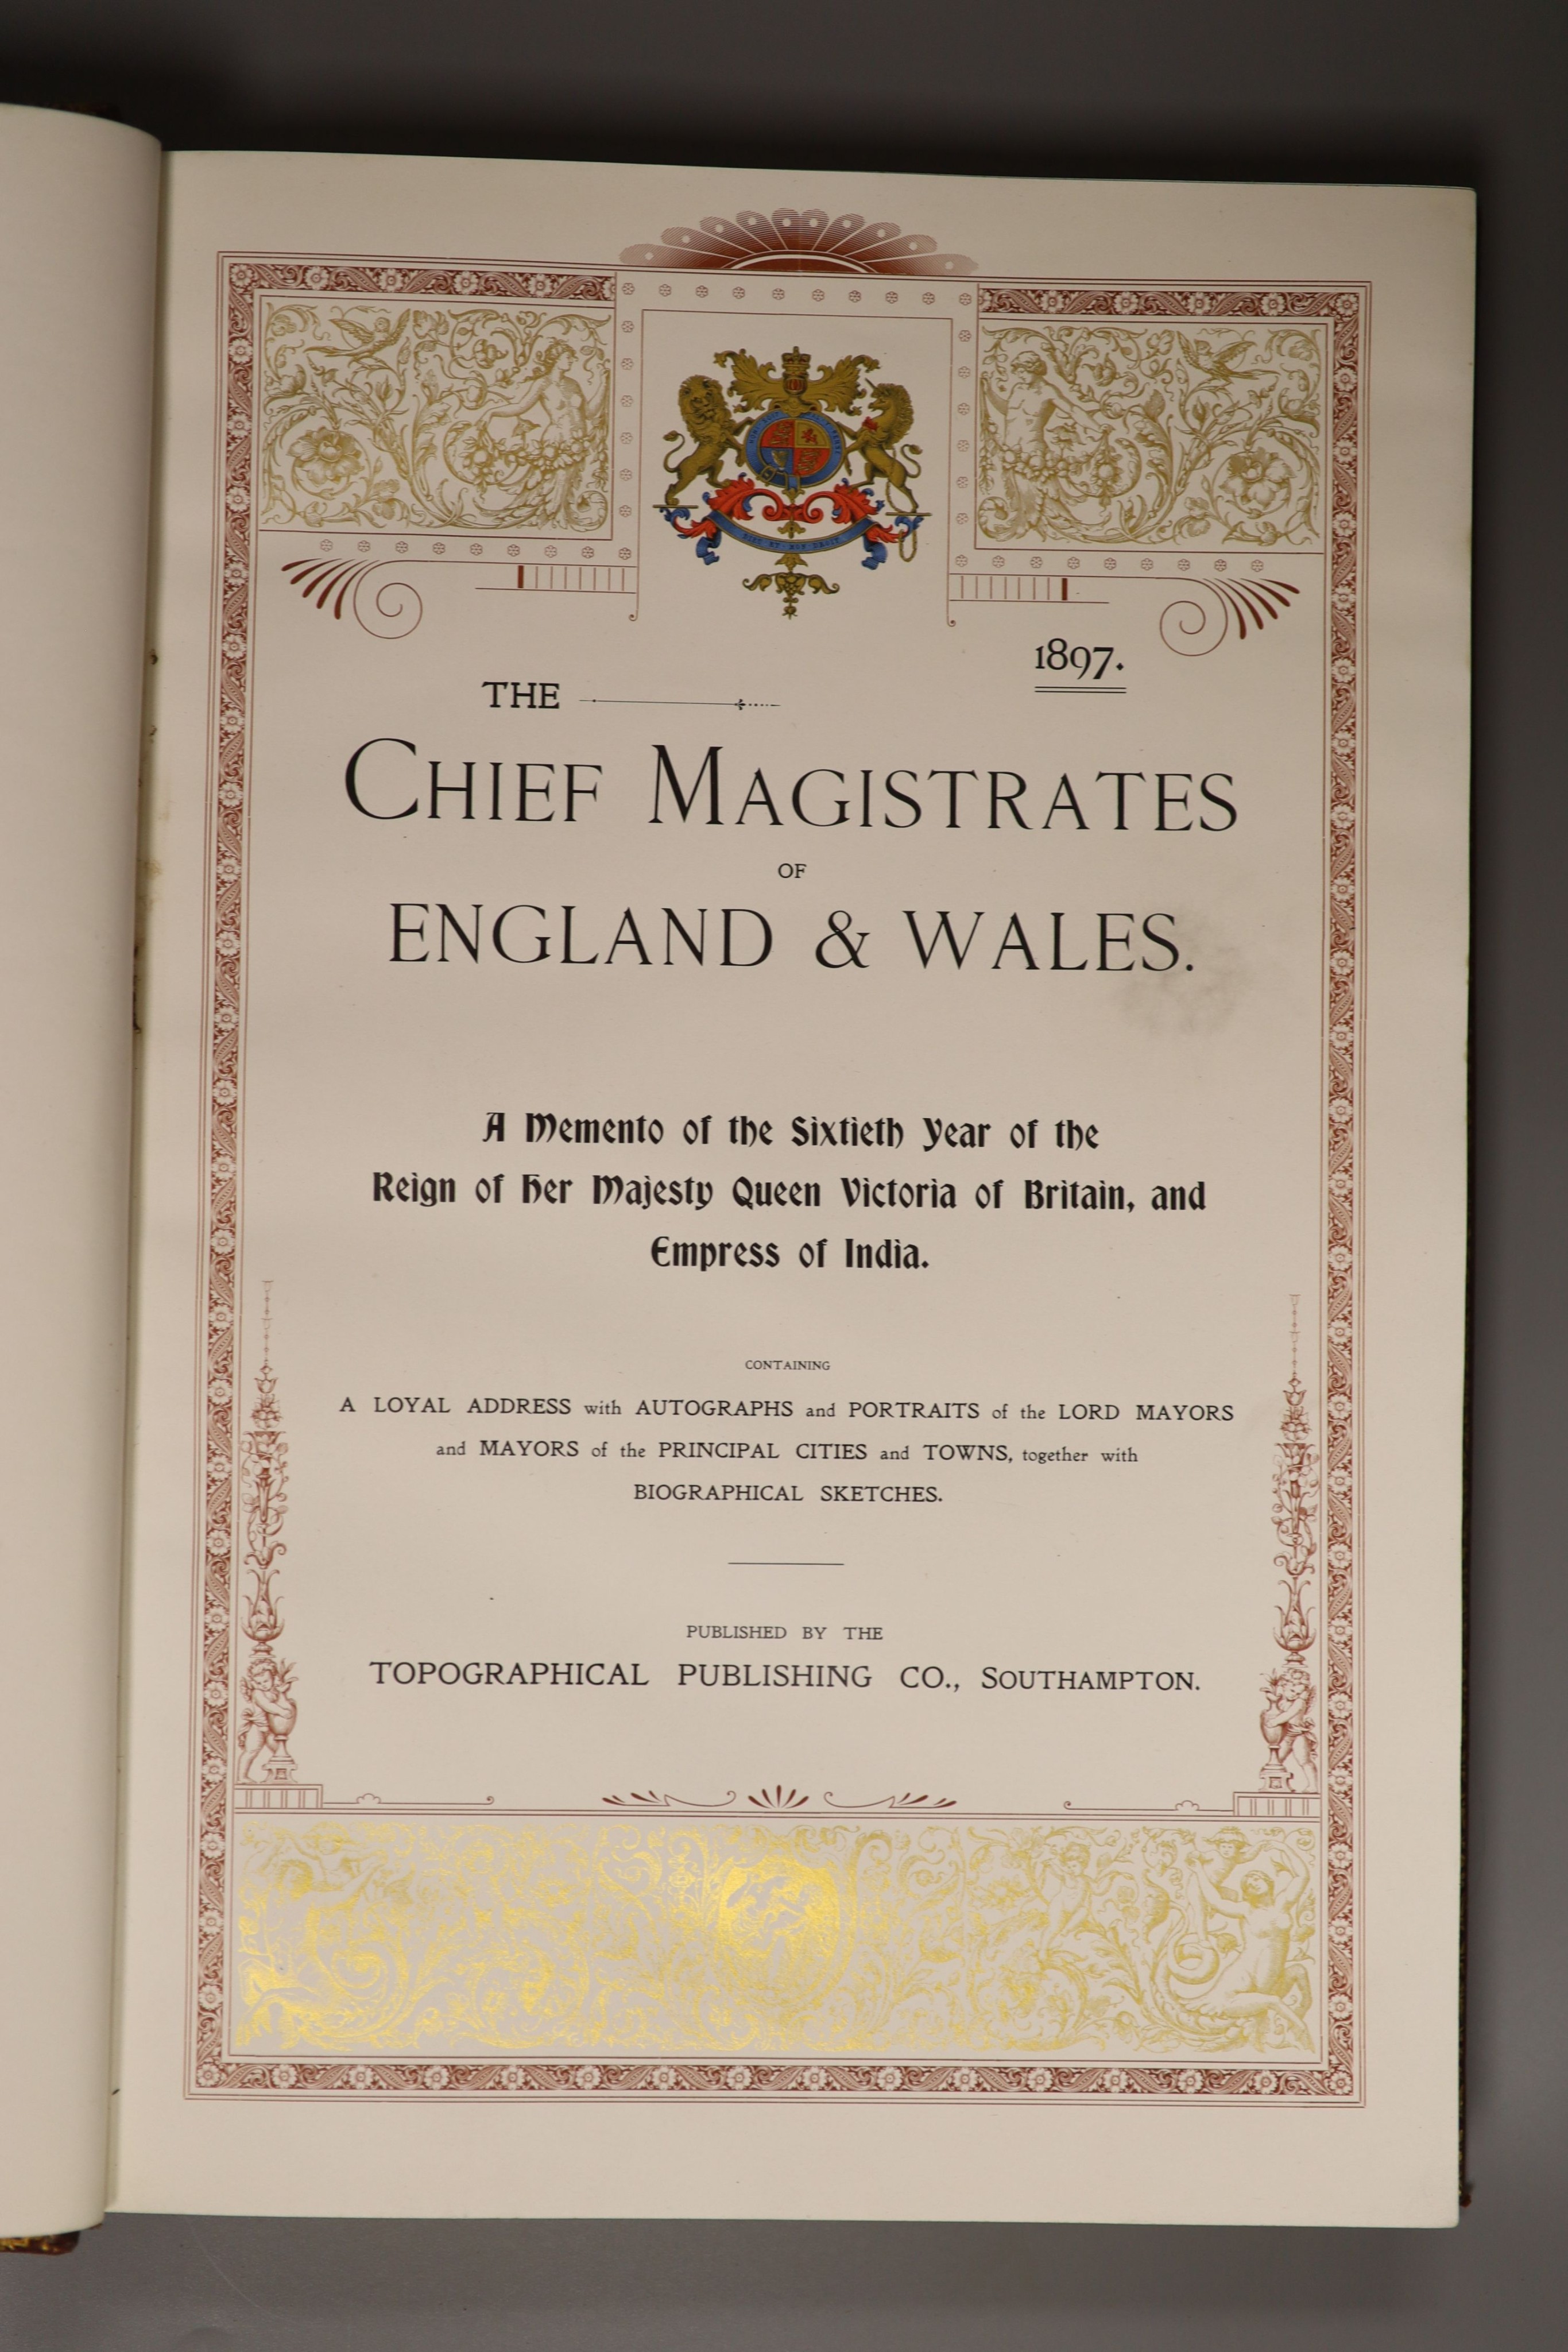 Magistrates - The Chief Magistrates of England and Wales, folio, red morocco gilt, London, 1897 and Hooper, William Eden - The Stock Exchange in the Year 1900, a souvenir, folio, vellum gilt, later plates and text spotte